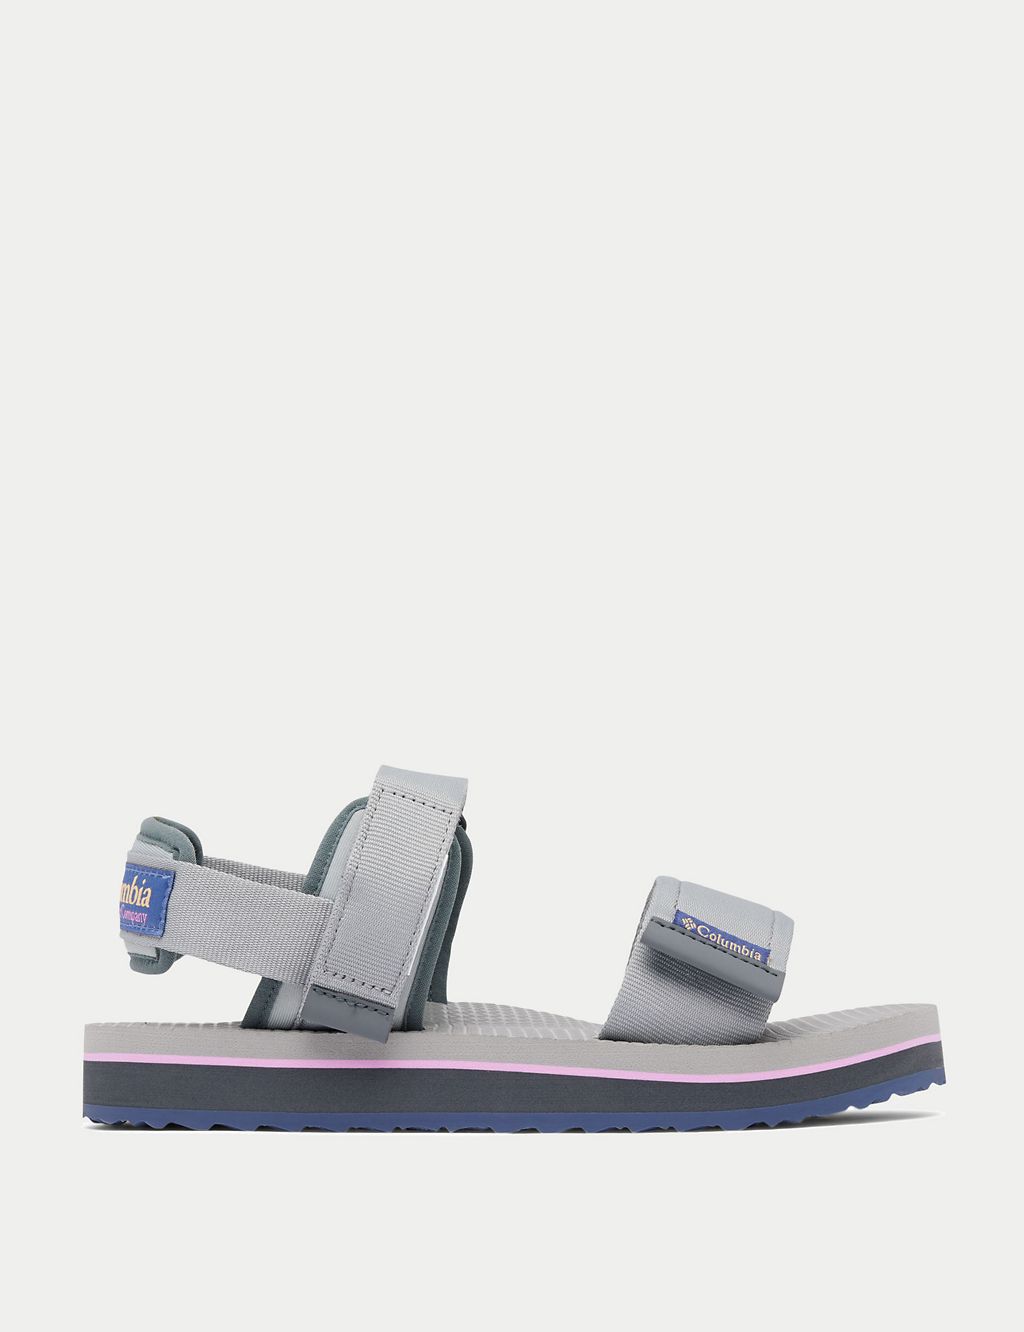 Via Ankle Strap Flat Sandals 3 of 6